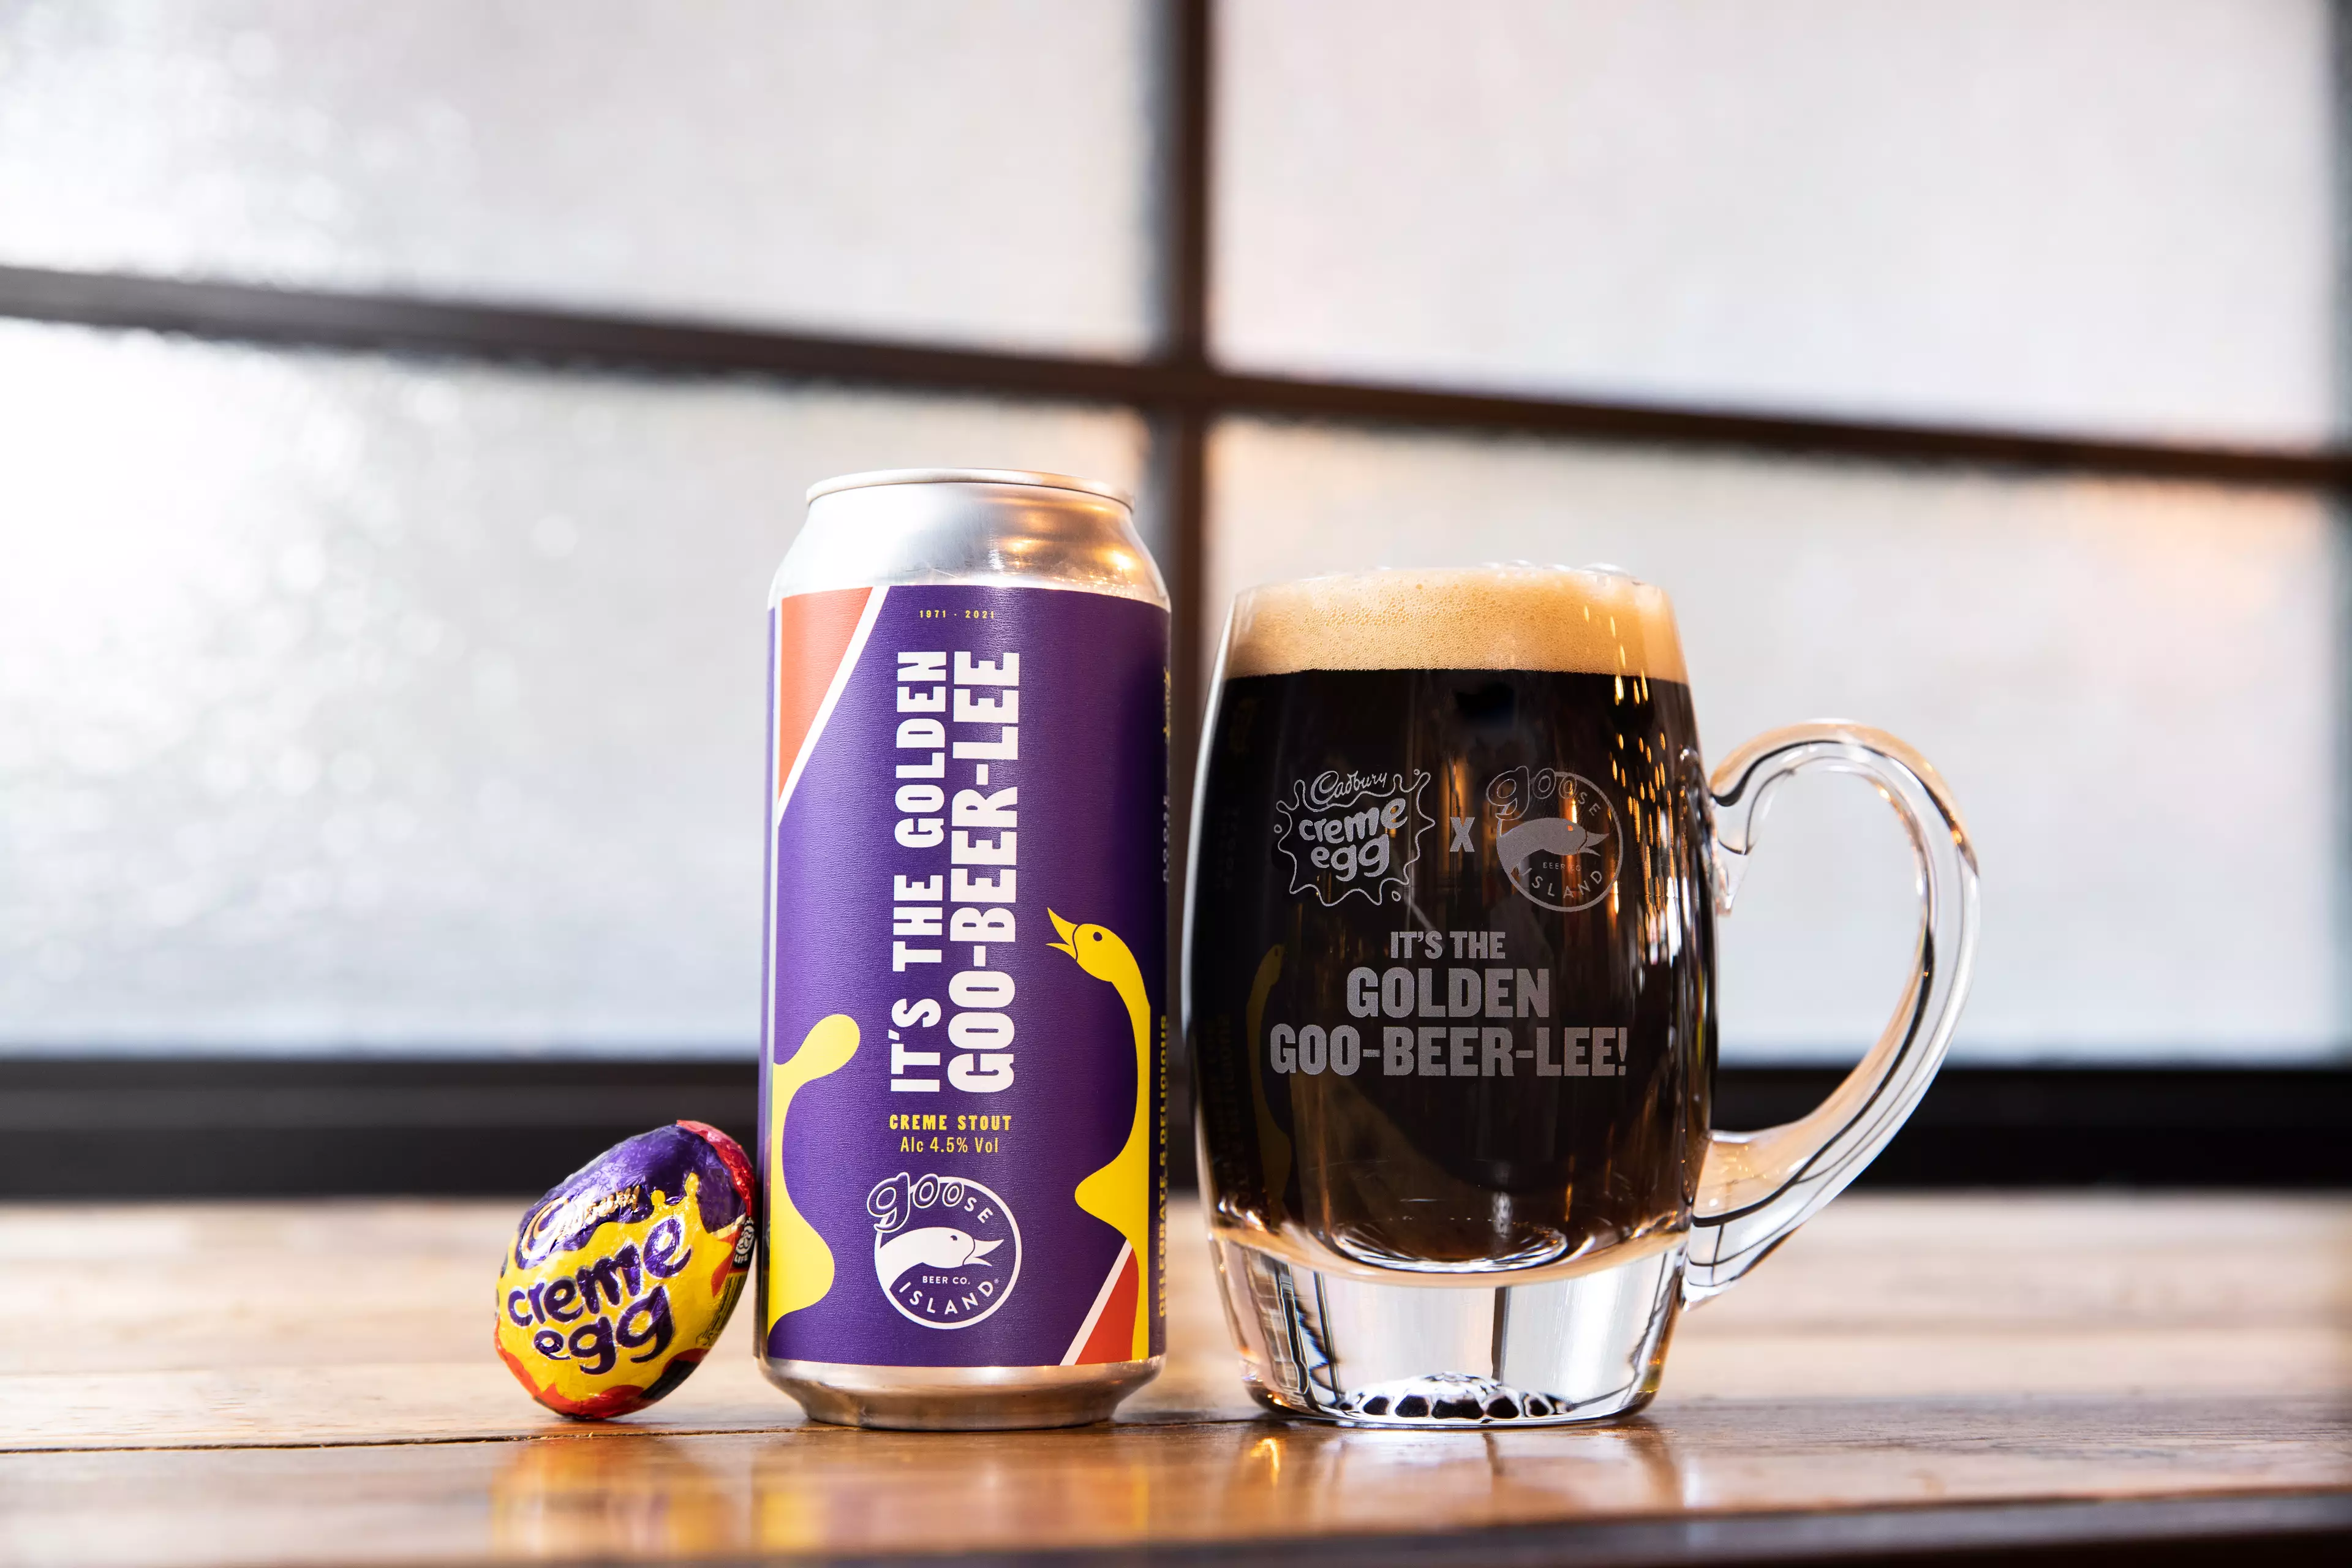 The Golden Goose beer takes inspiration from Cadbury's iconic Creme Egg (